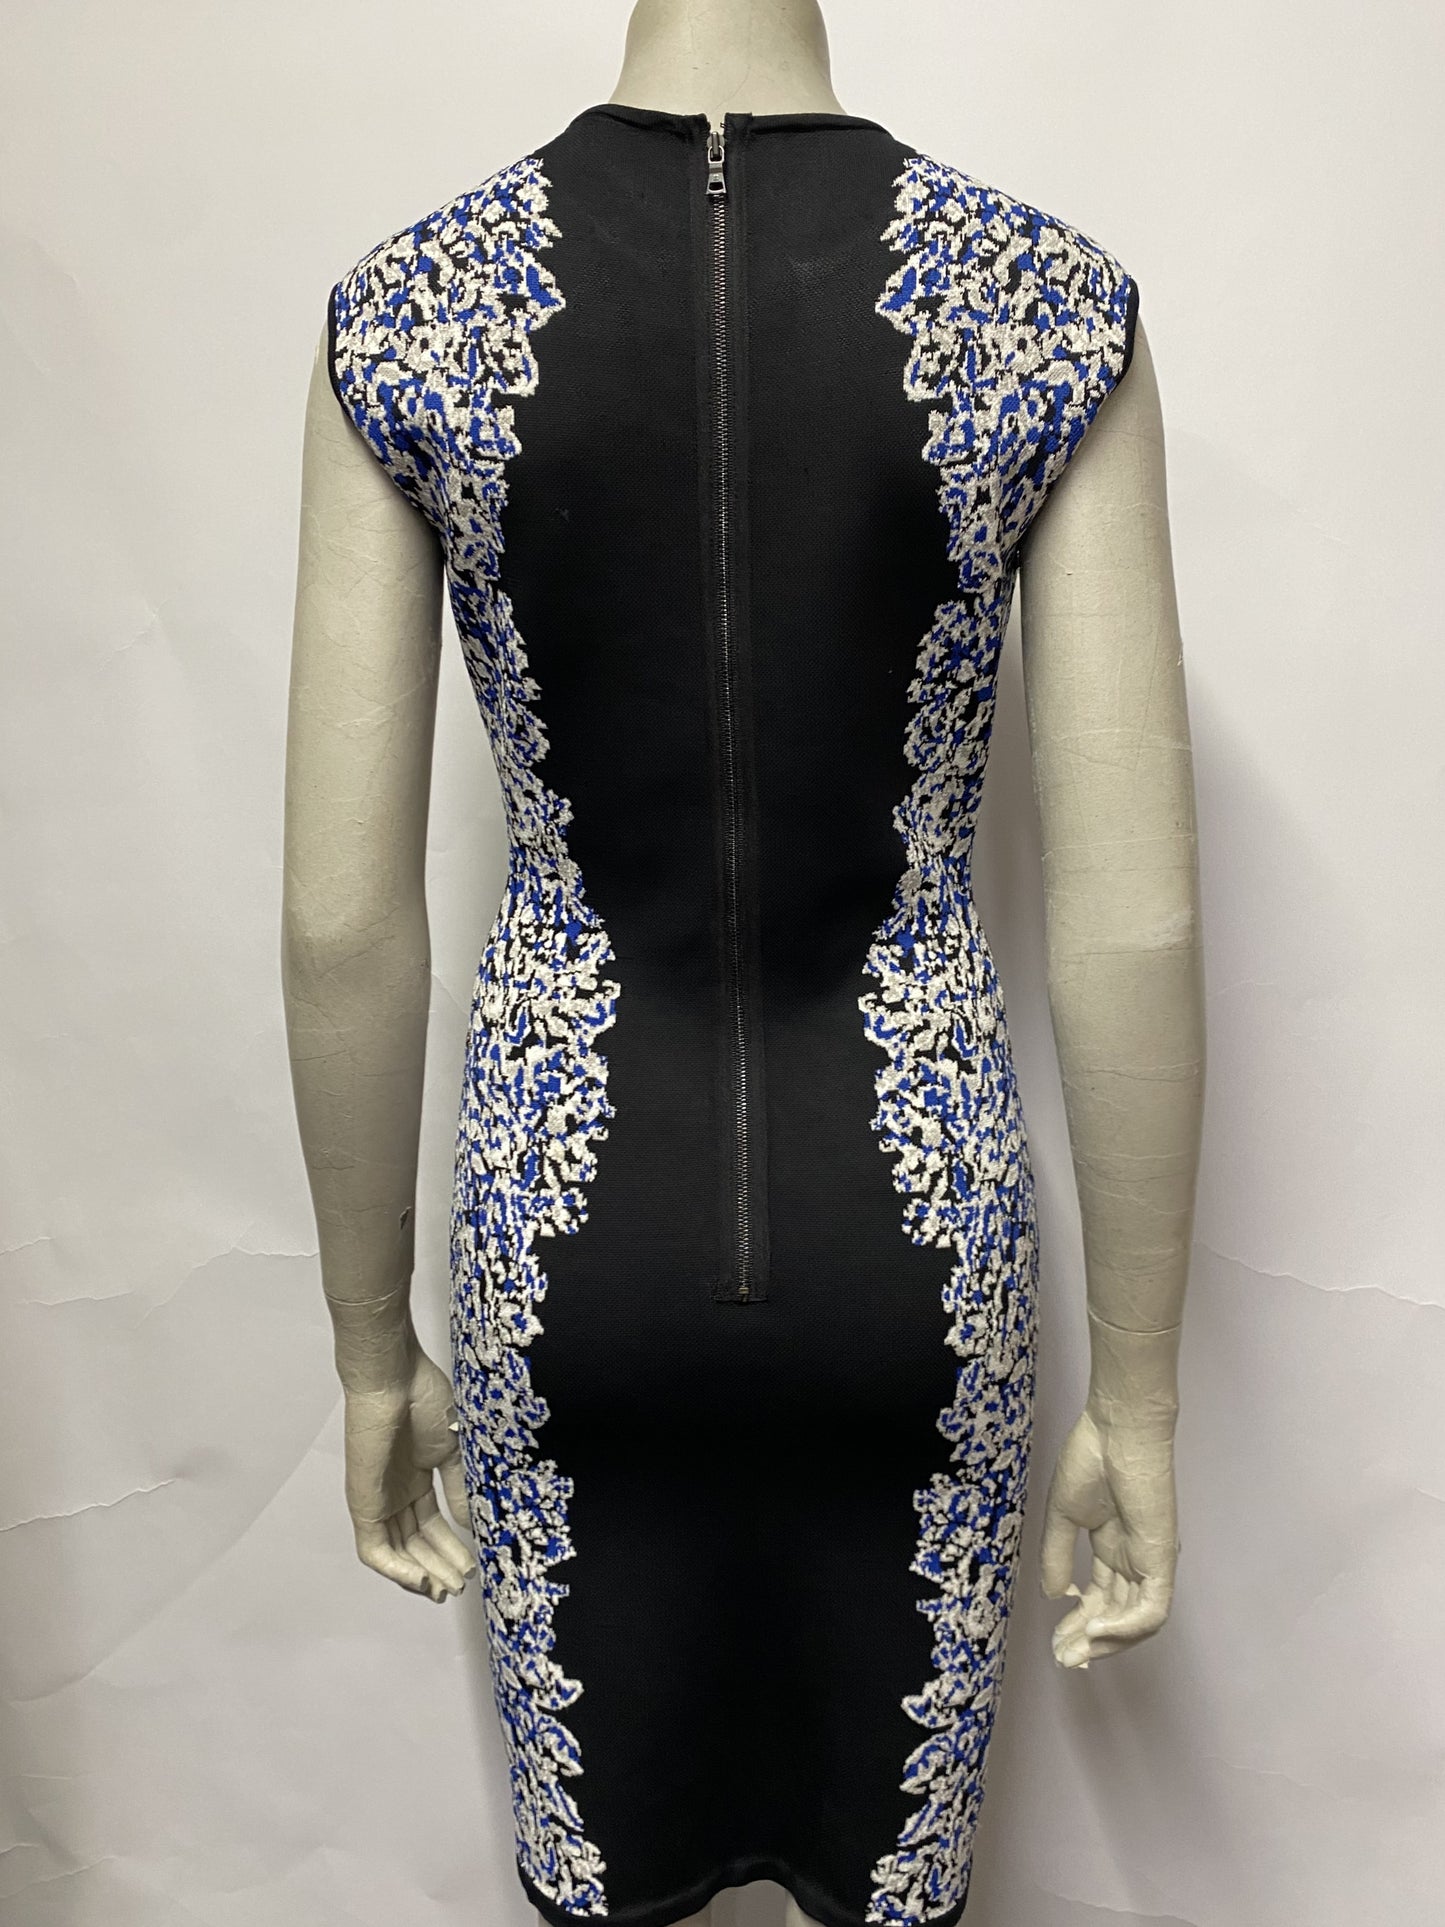 BCBGMAXAZRIA Black and Blue Knit Patterned Bodycon Dress Small